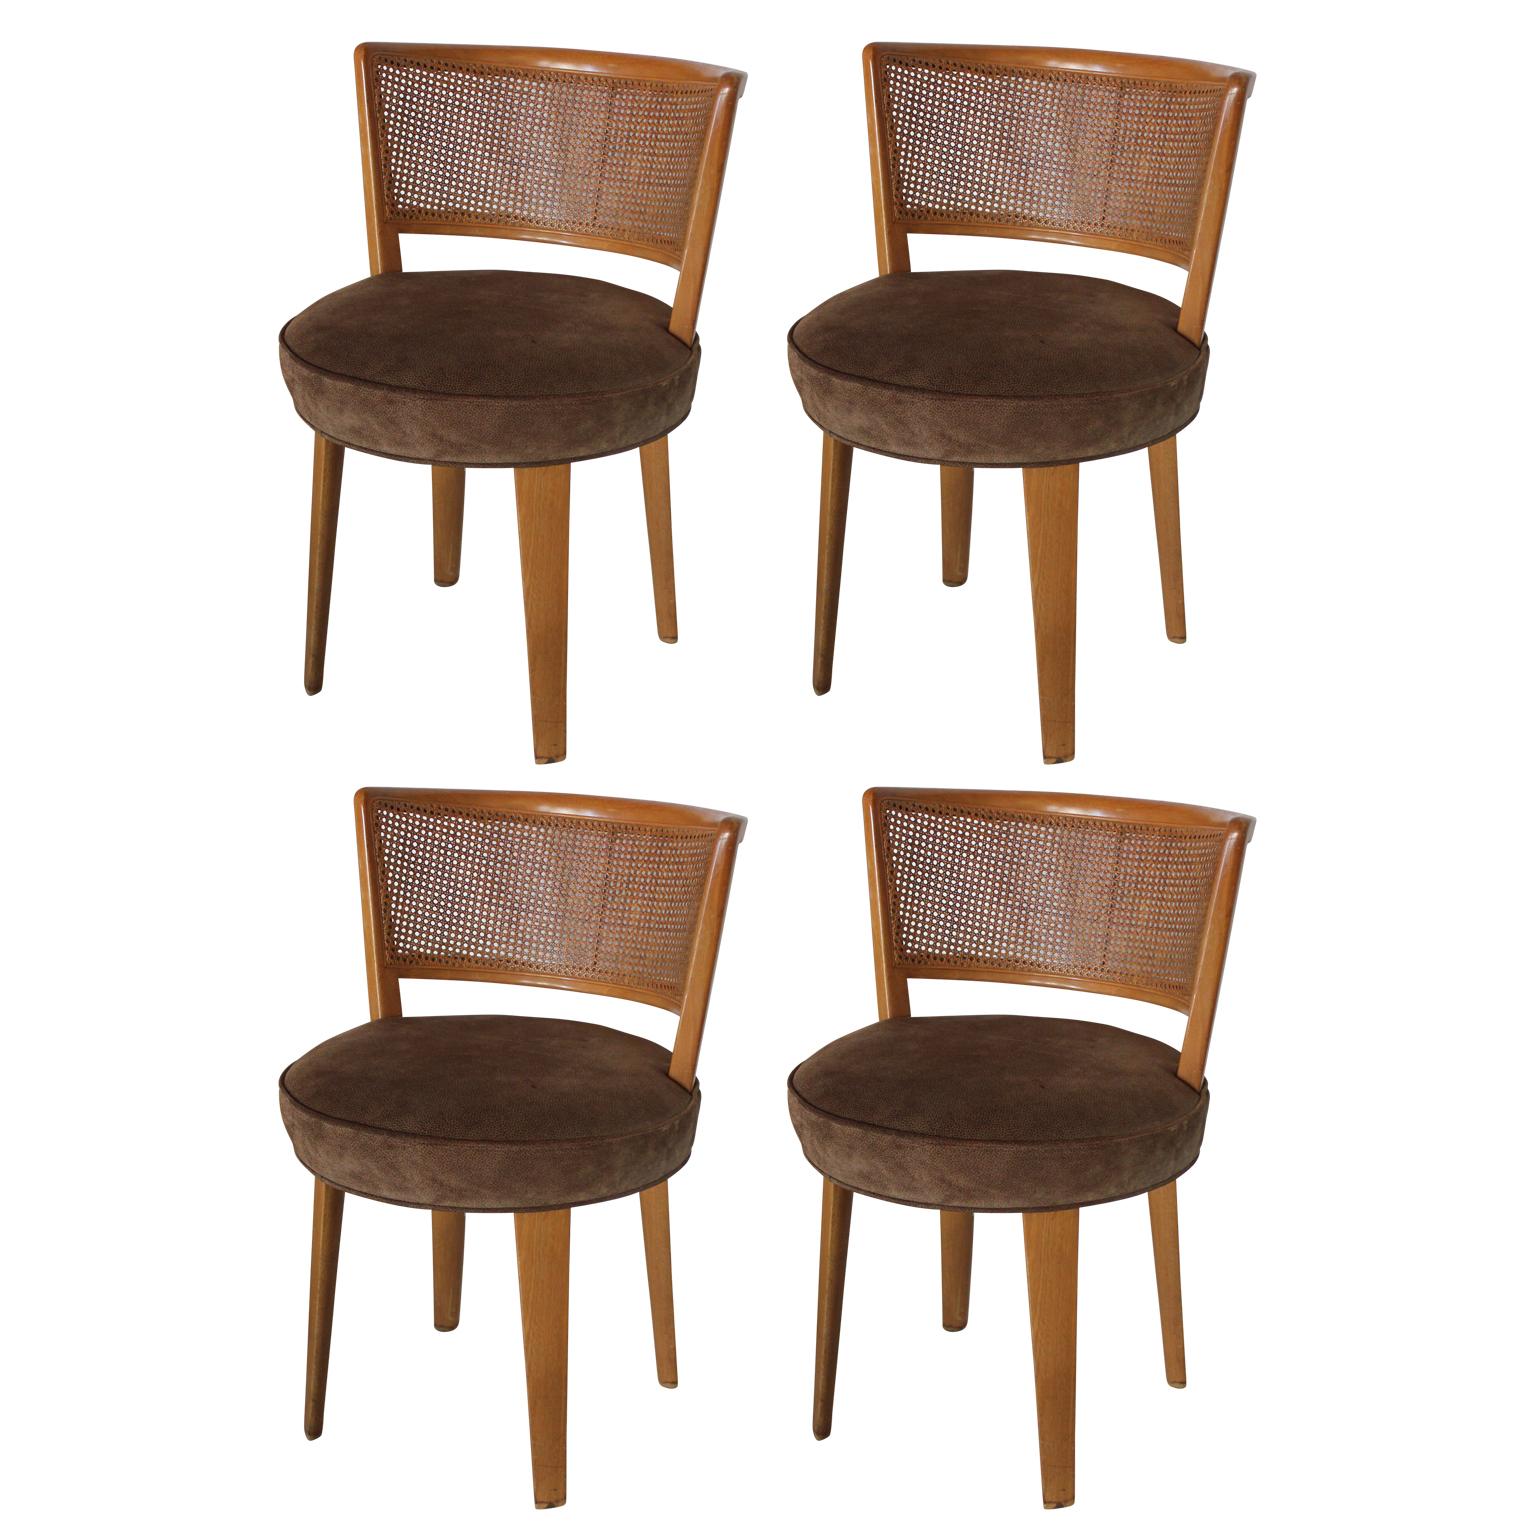 Set of Four Modern Cane Back Swivel Dining Chairs by Edward Wormley for Dunbar